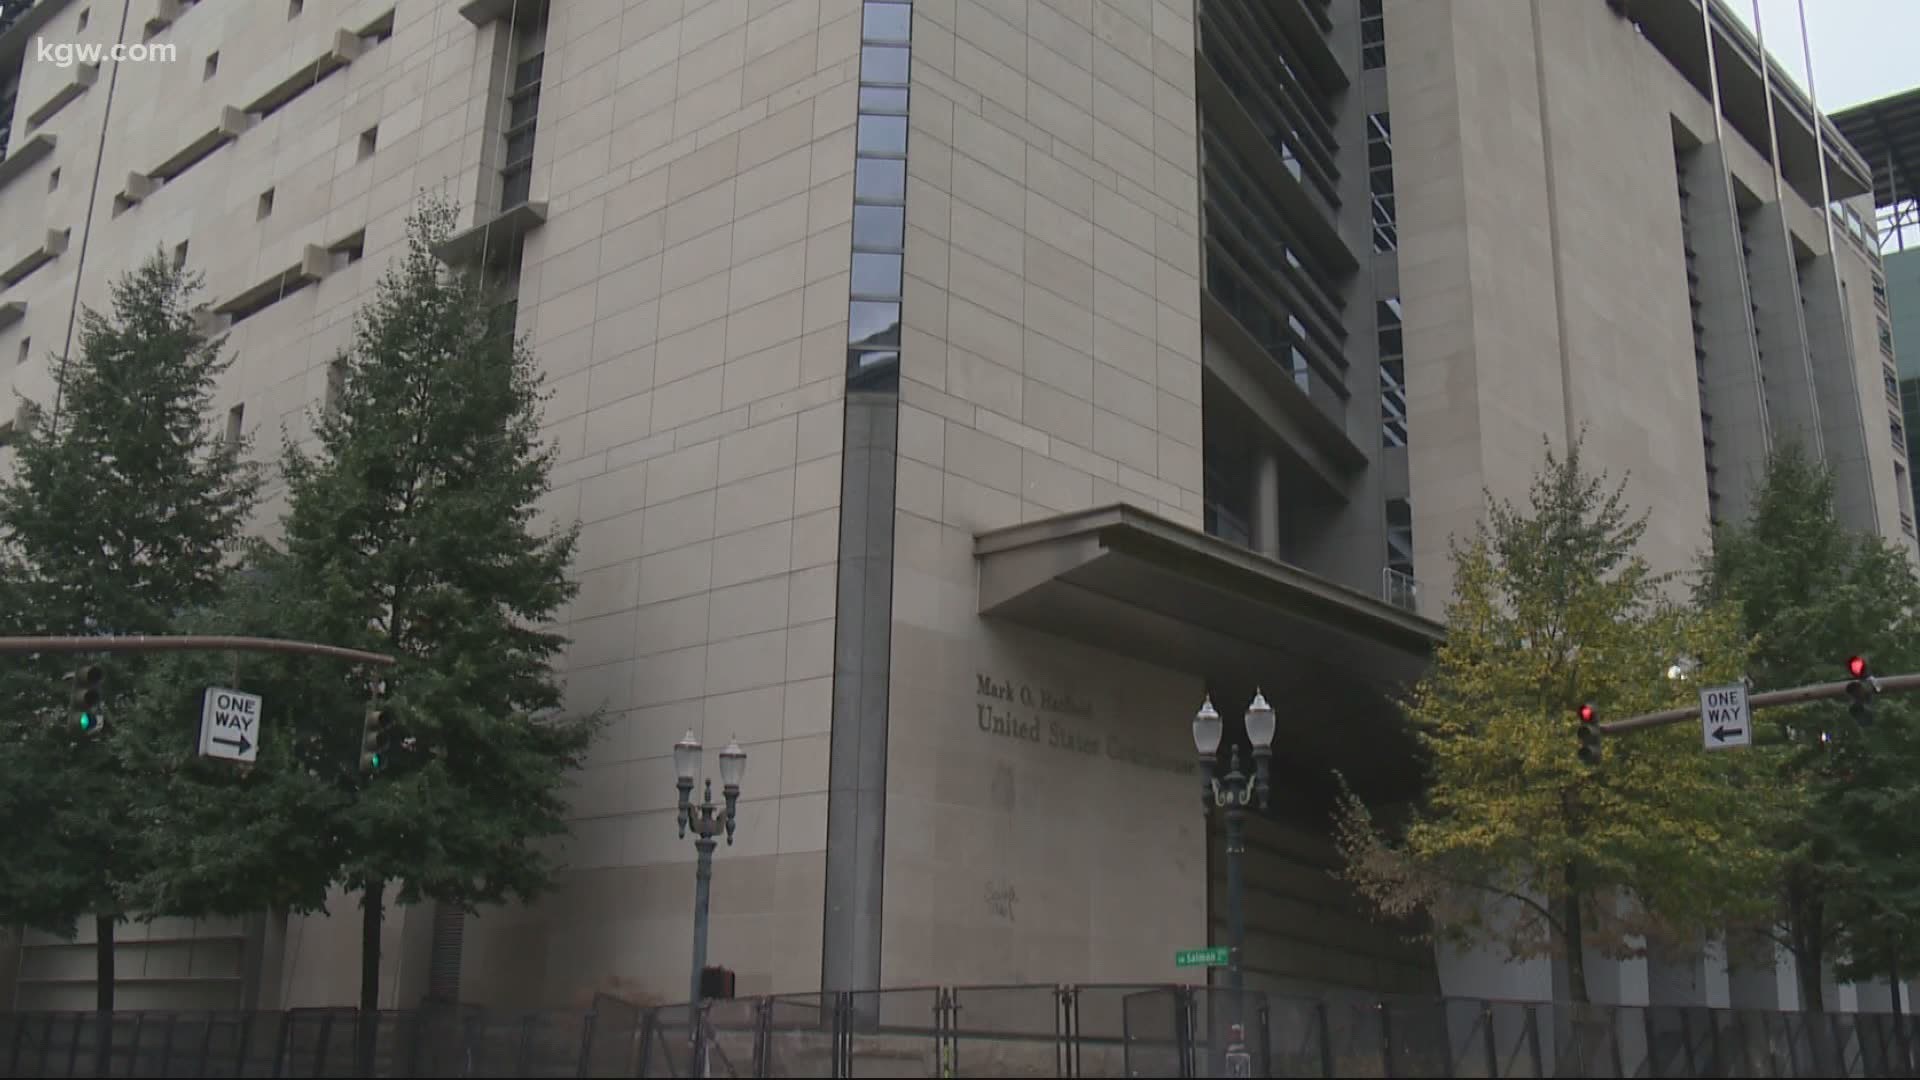 Several buildings in downtown Portland were closed Friday due to an unspecified threat, and city employees have been asked to leave the area at noon.